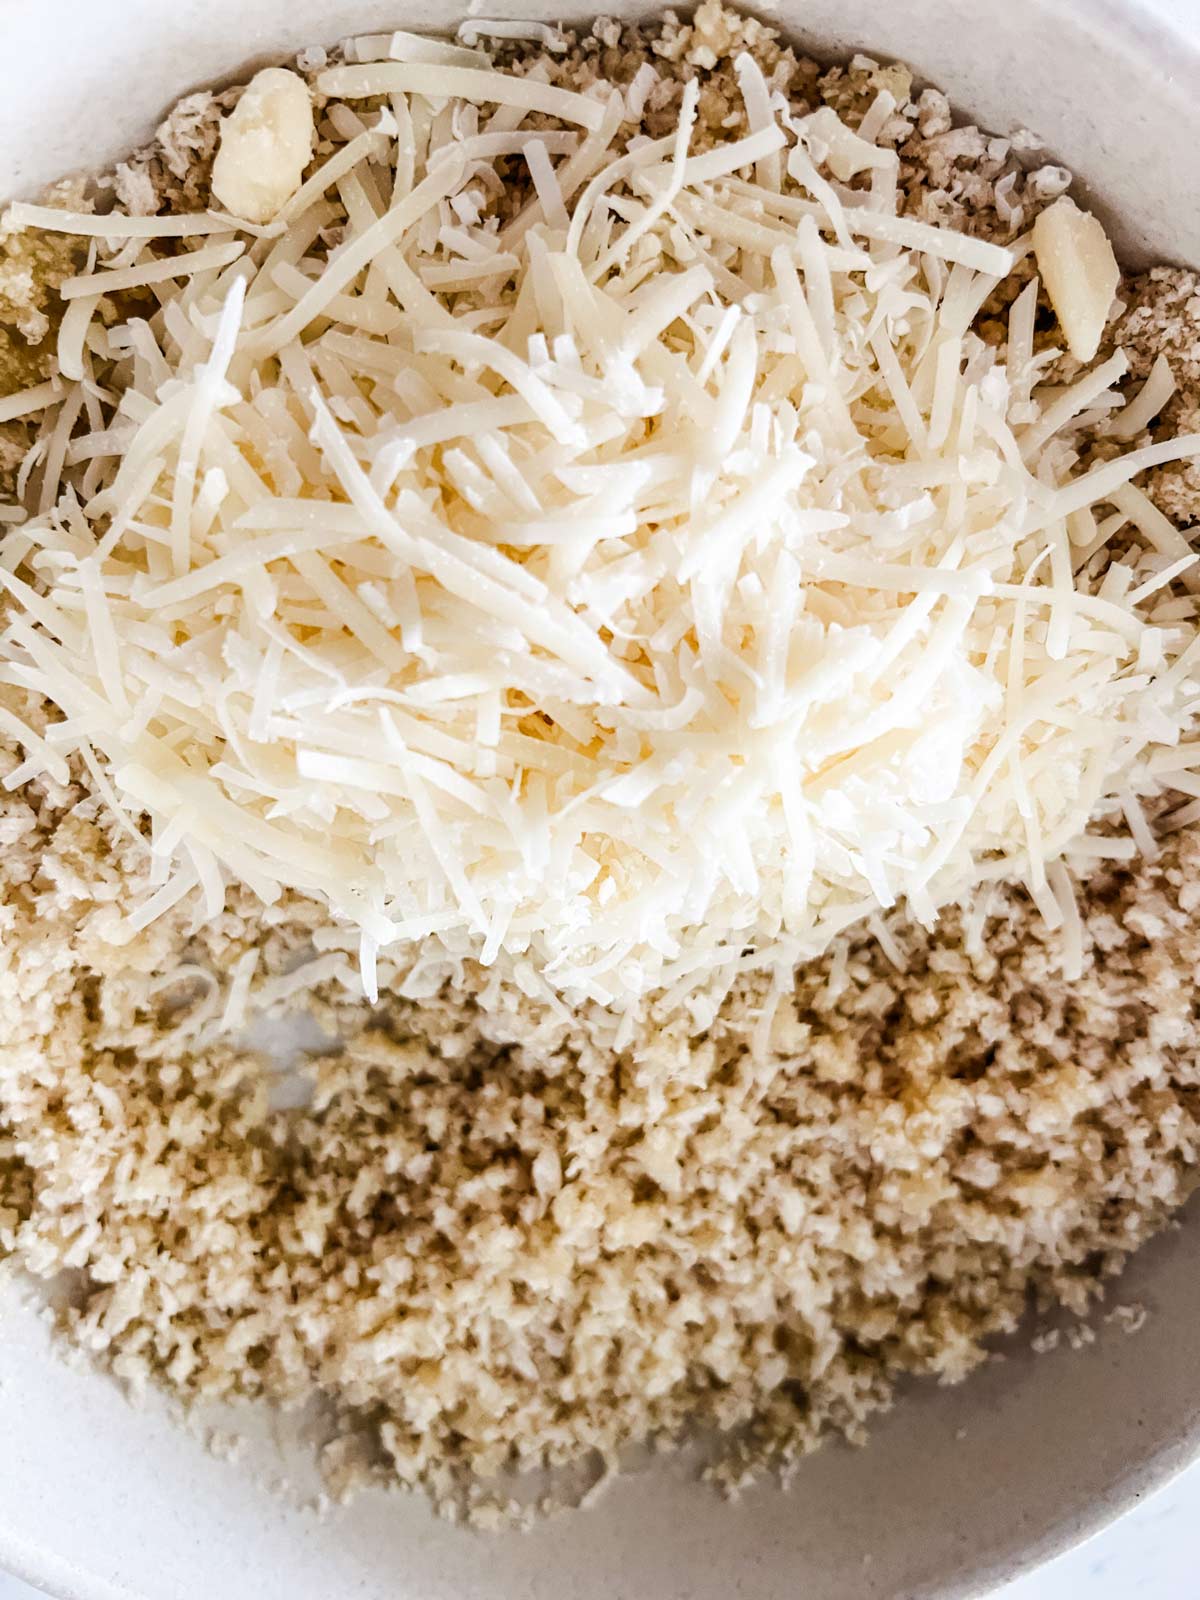 Butter coated breadcrumbs and Parmesan cheese in a bowl.